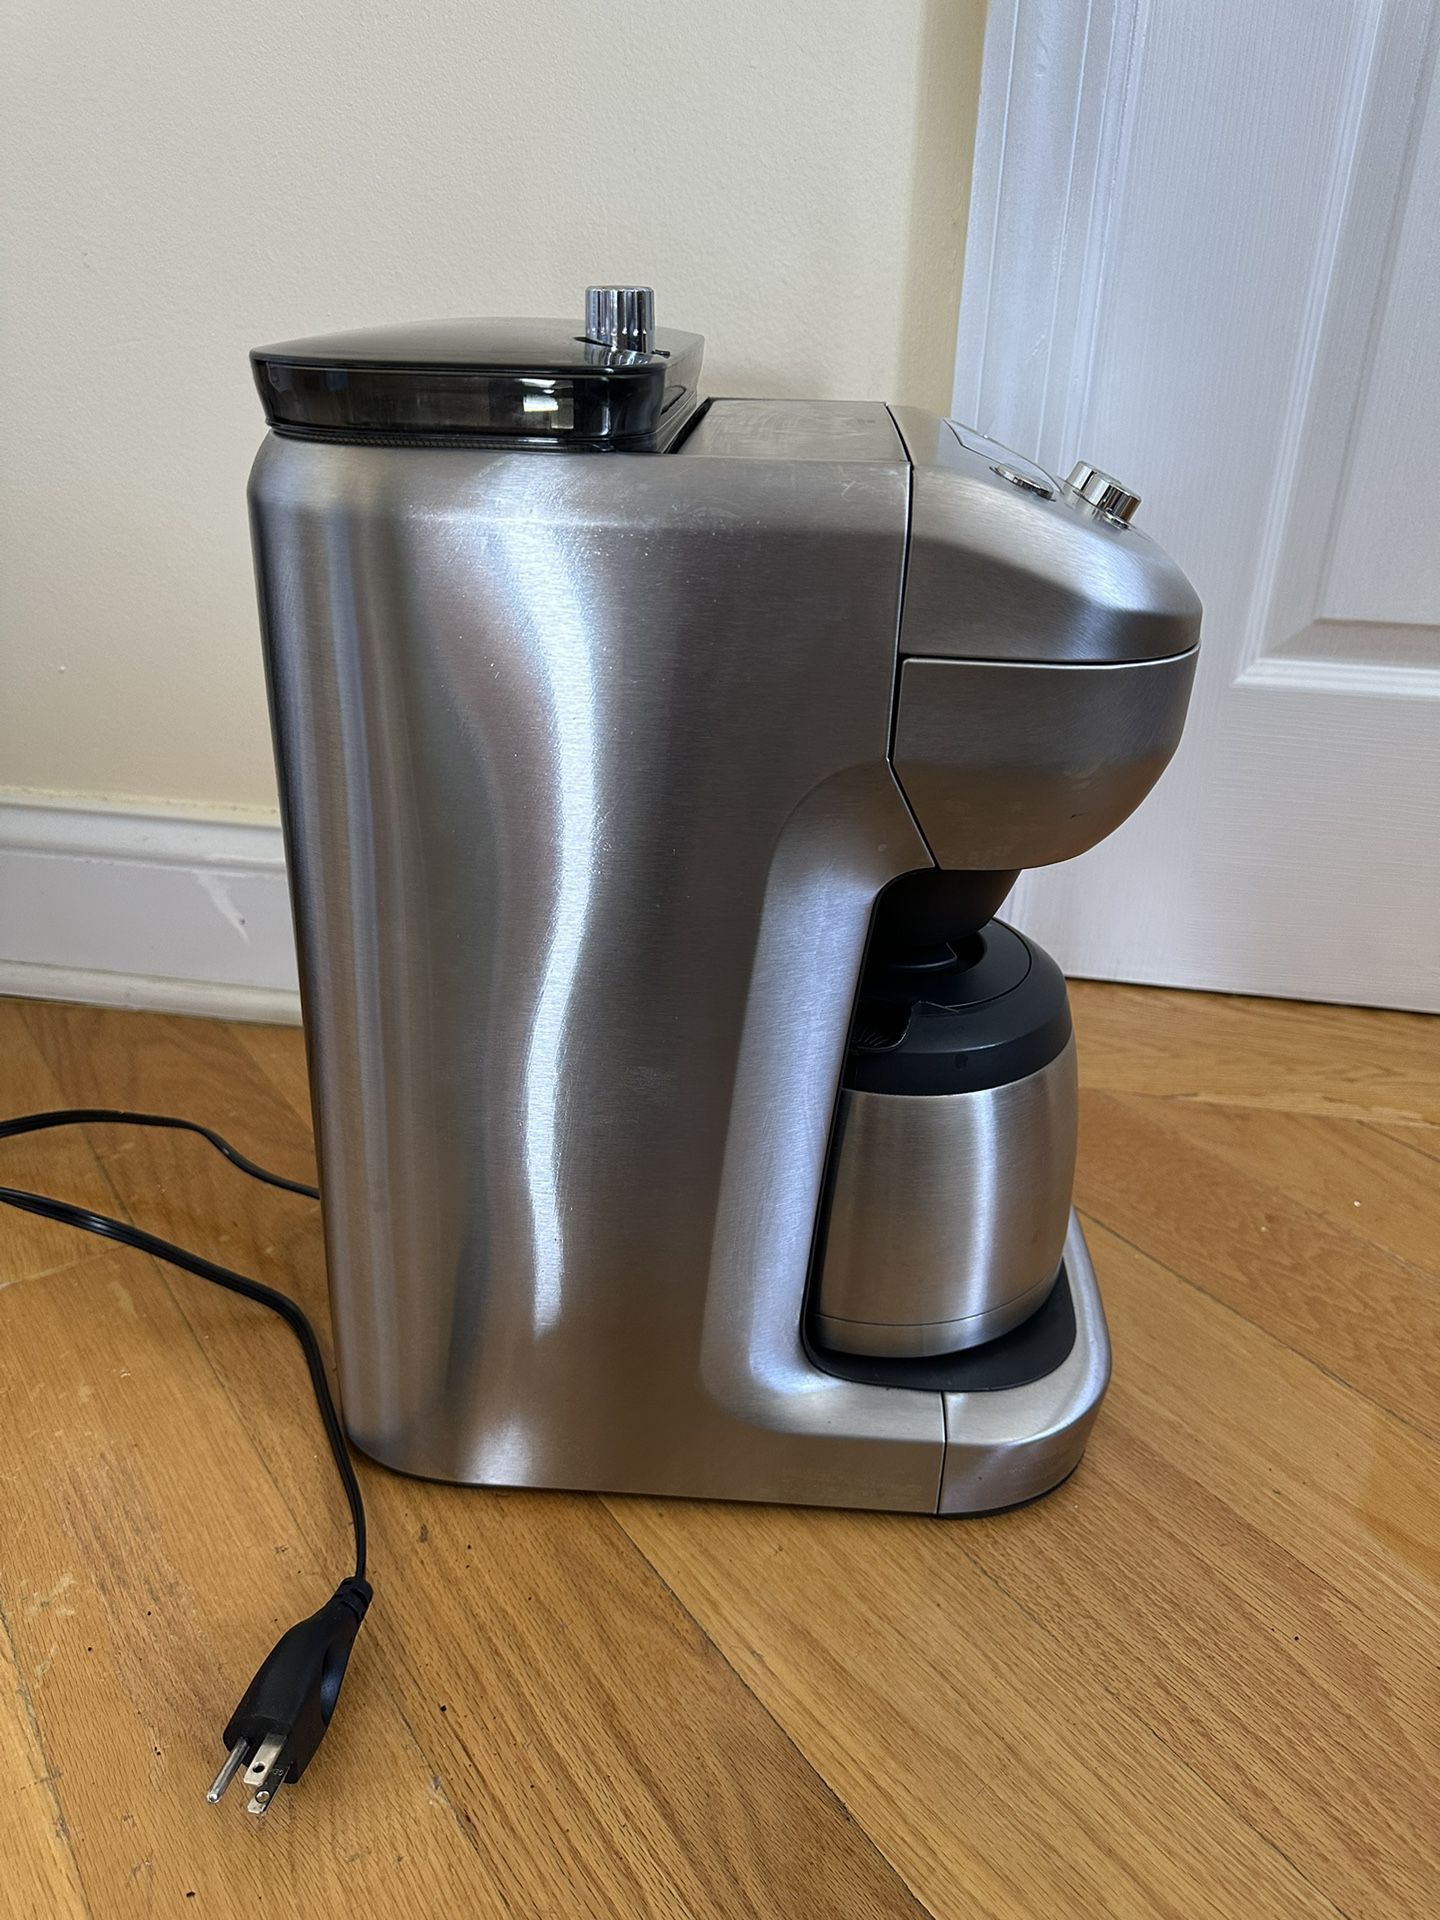 BREVILLE The Grind Control Coffee Maker for Sale in Croton-on-hudson, NY -  OfferUp